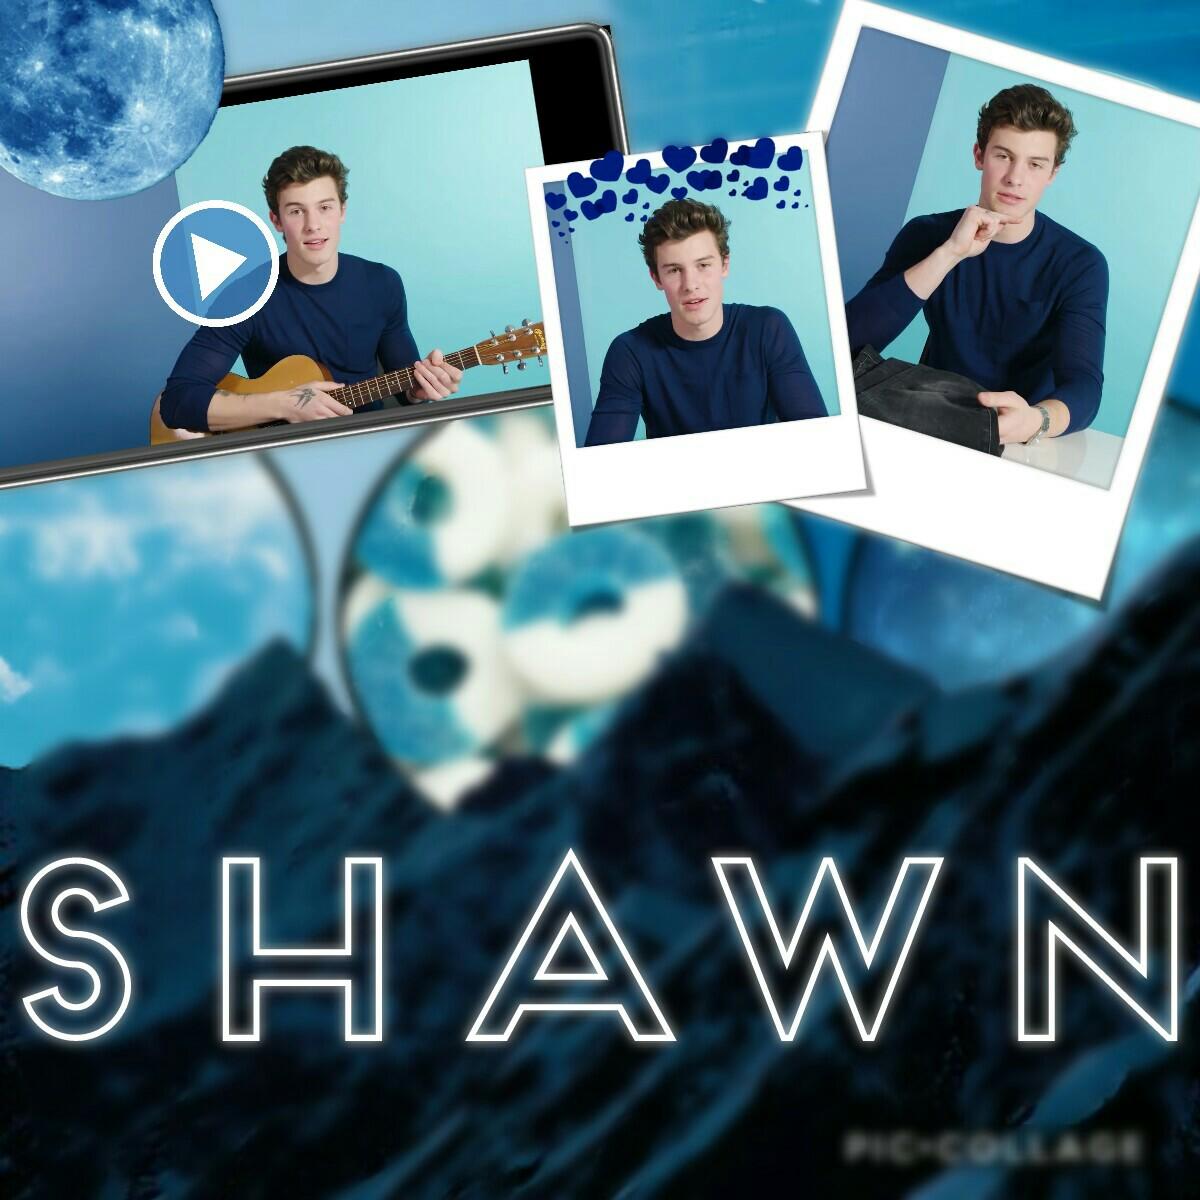 my long awaited shawn mendes collage. sorry for inactivity. ily all!